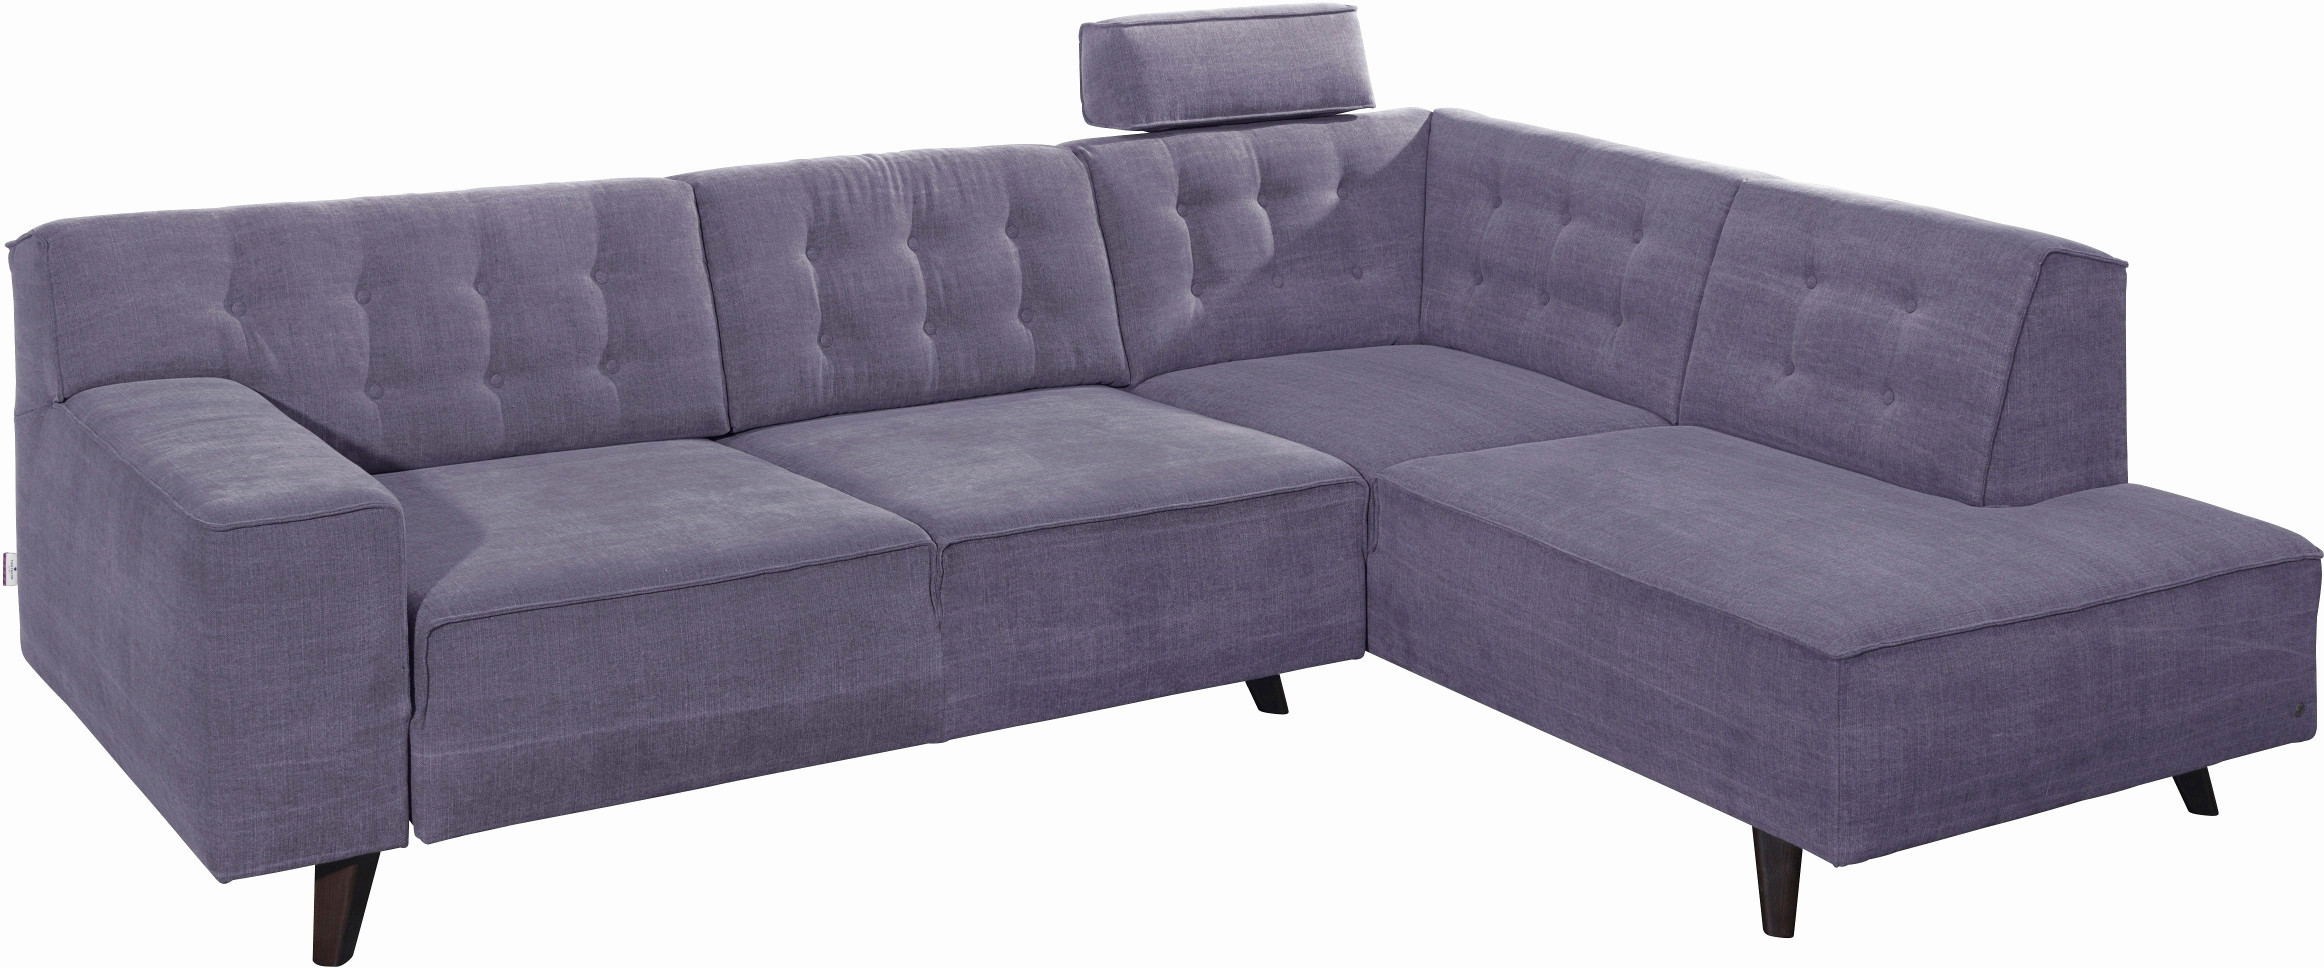 Tom Tailor Sofa
 22 Sensationell Niedlich tom Tailor Couch Modell